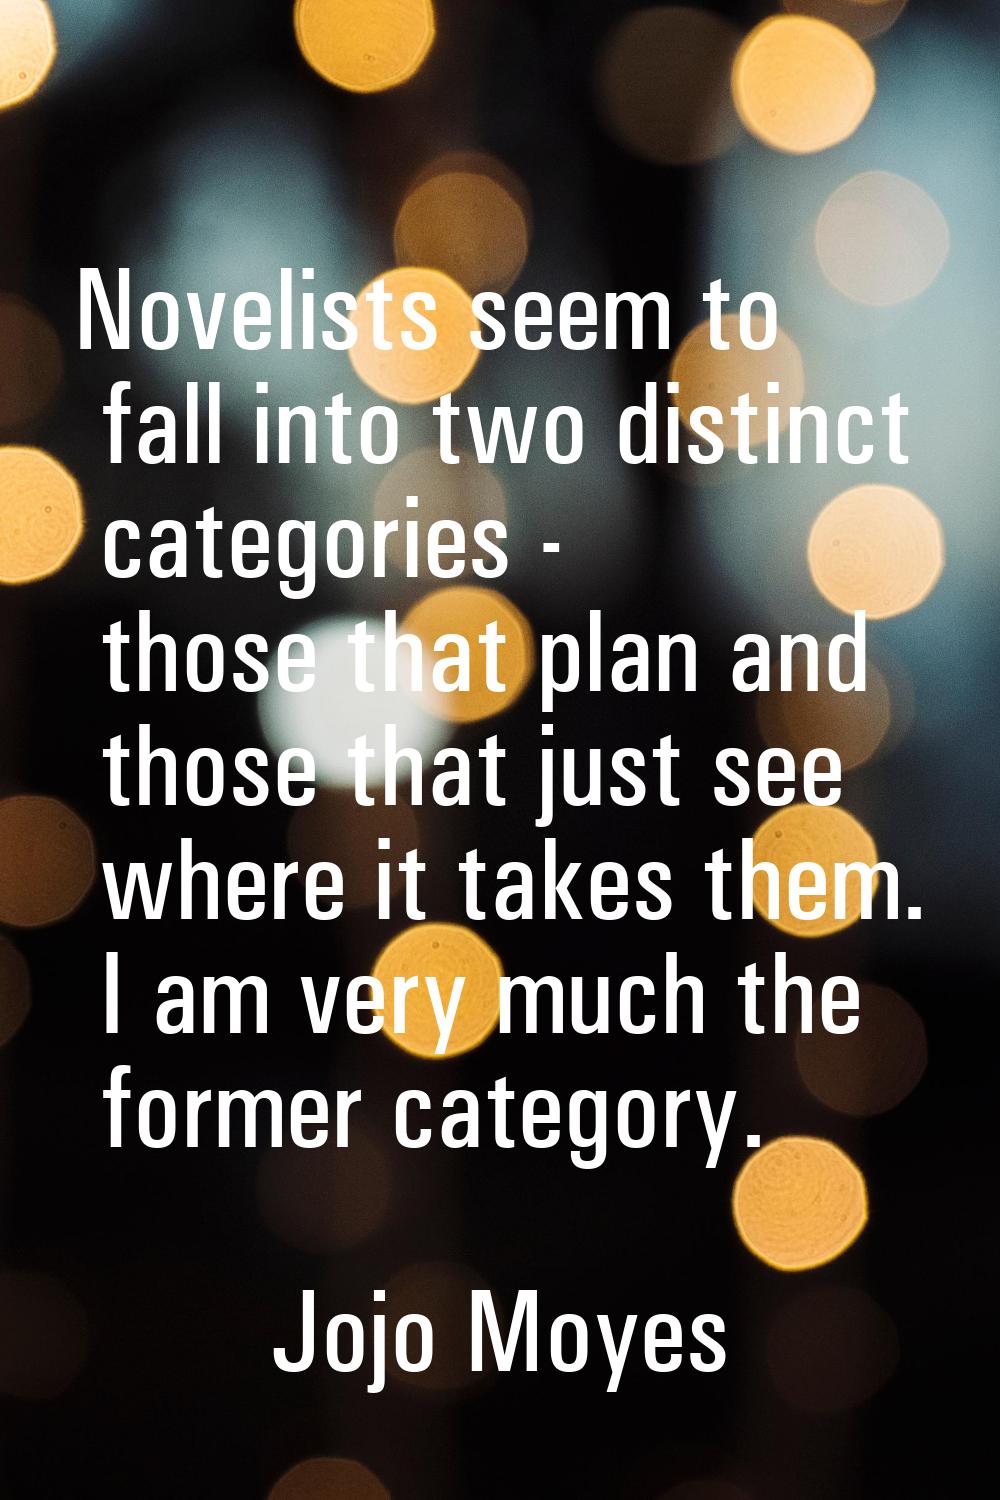 Novelists seem to fall into two distinct categories - those that plan and those that just see where